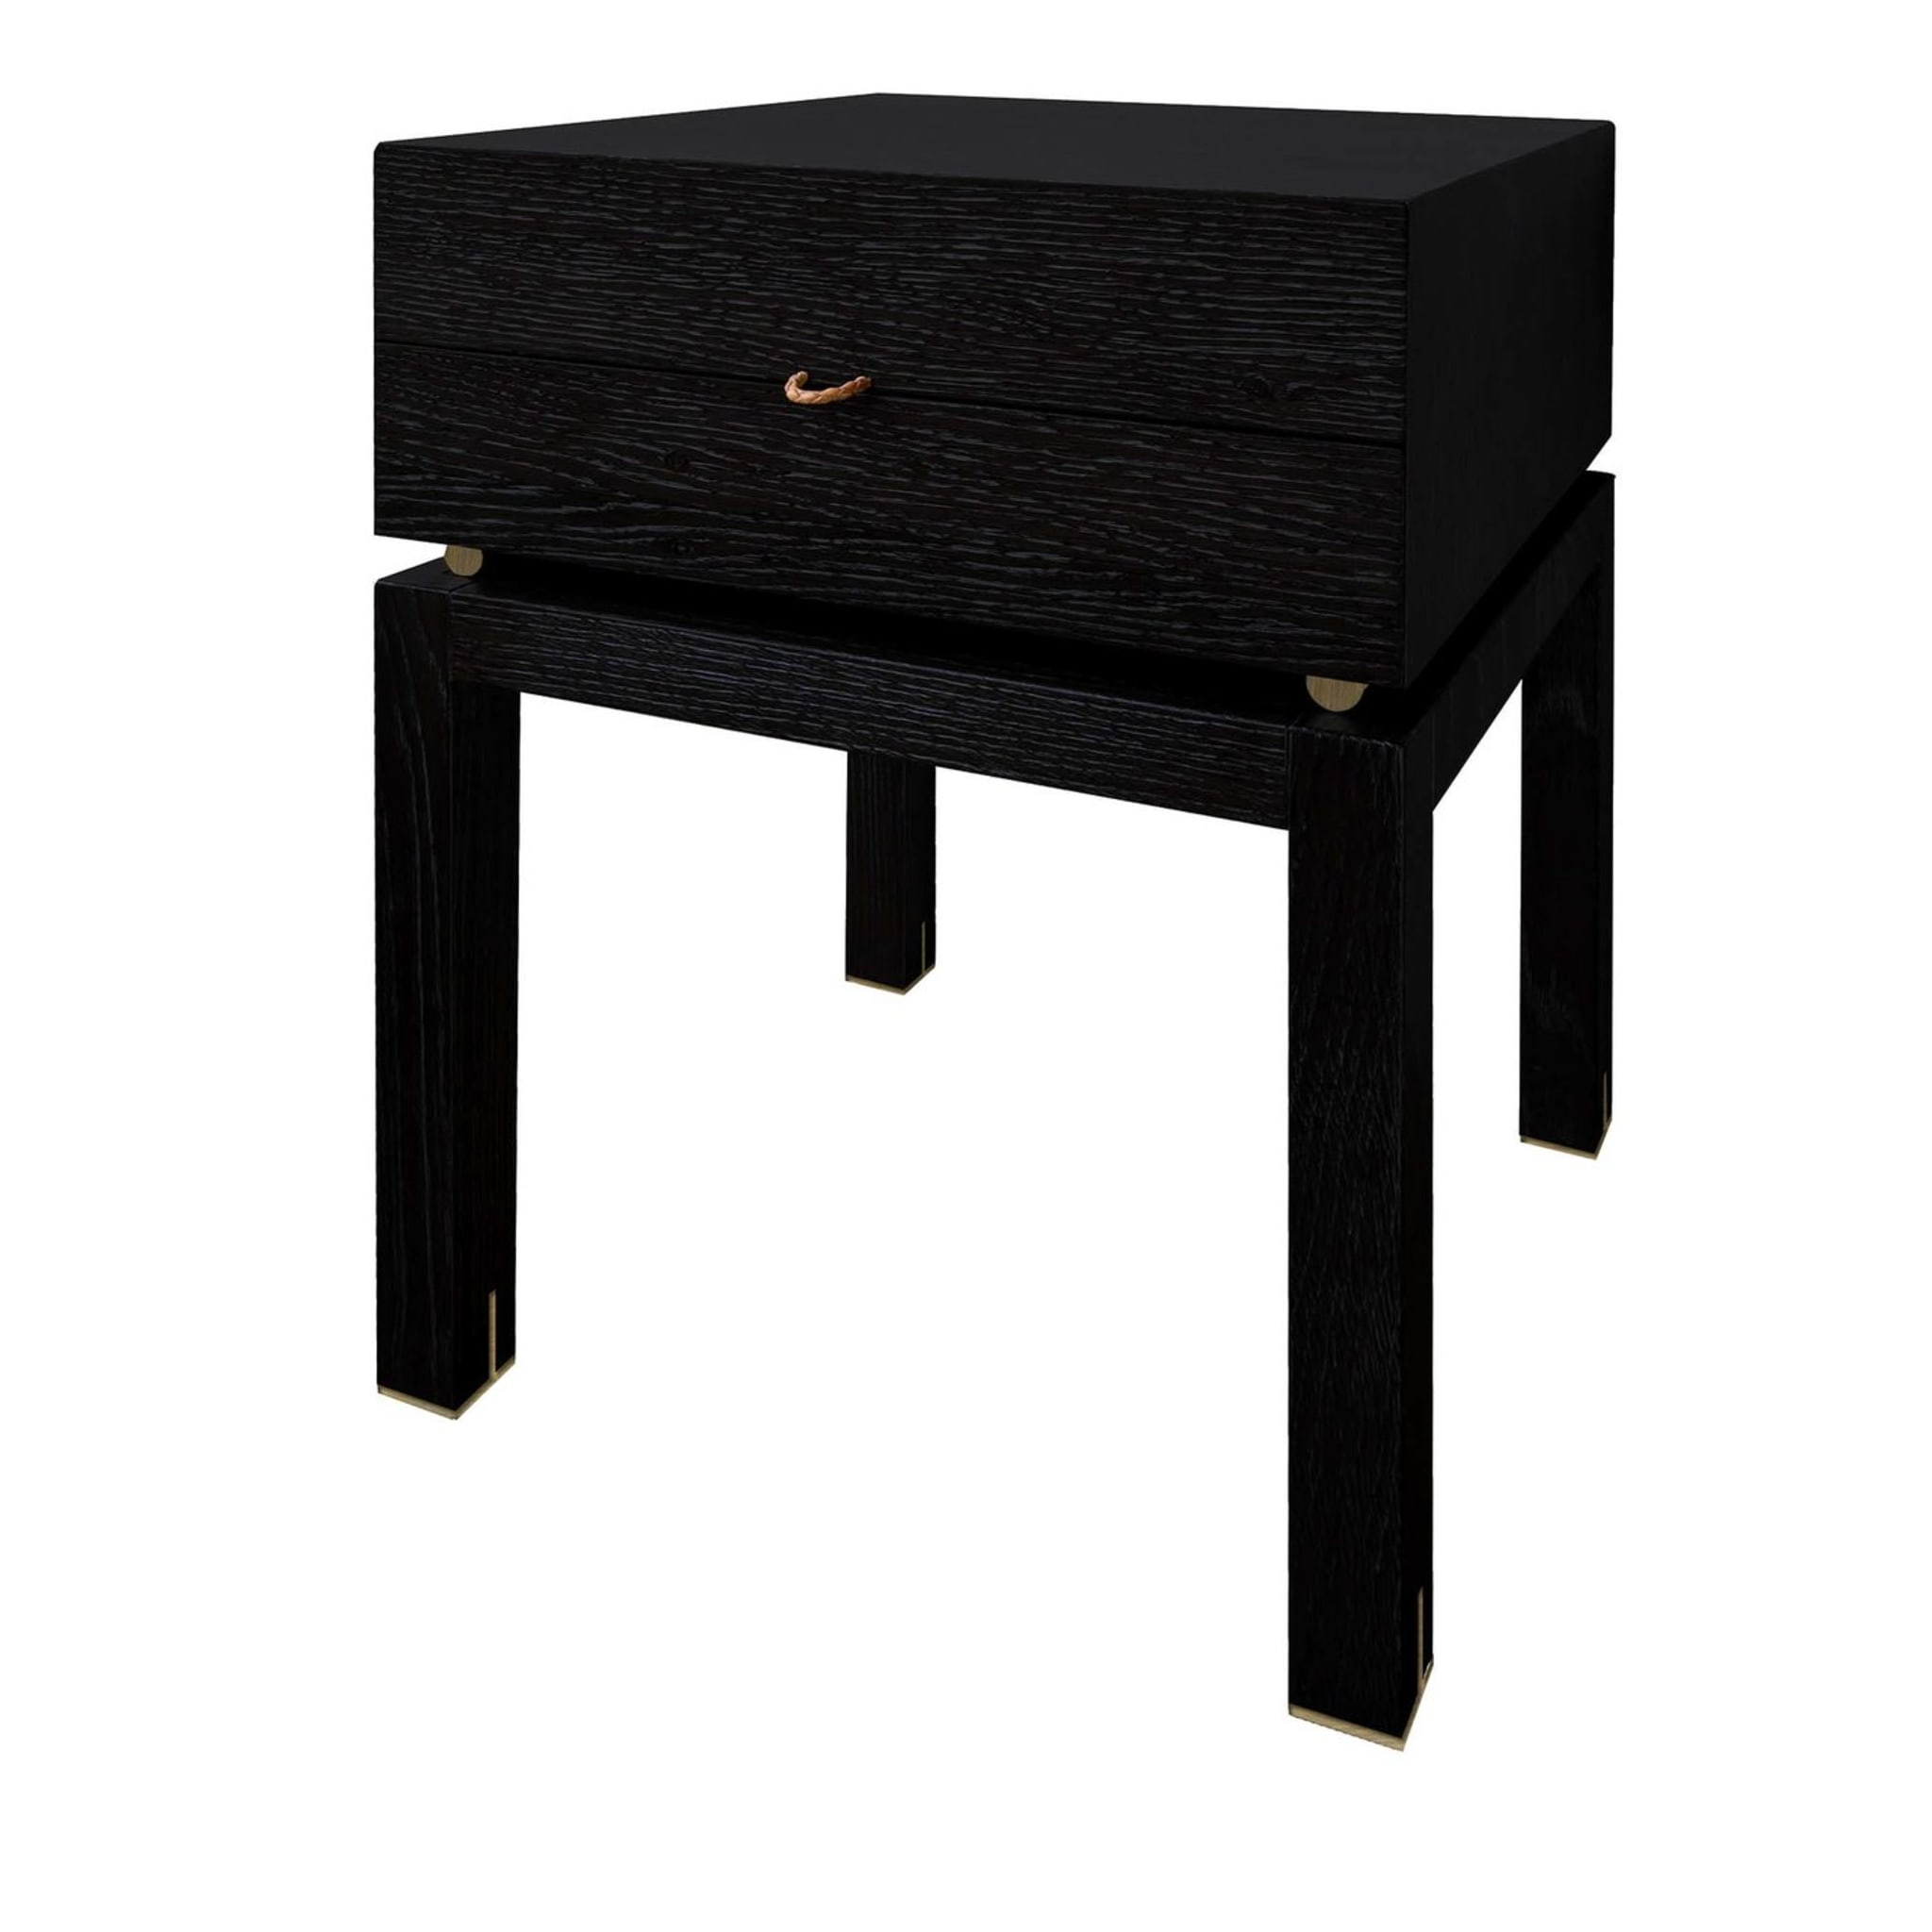 102 TNT Black Bedside Table - Main view